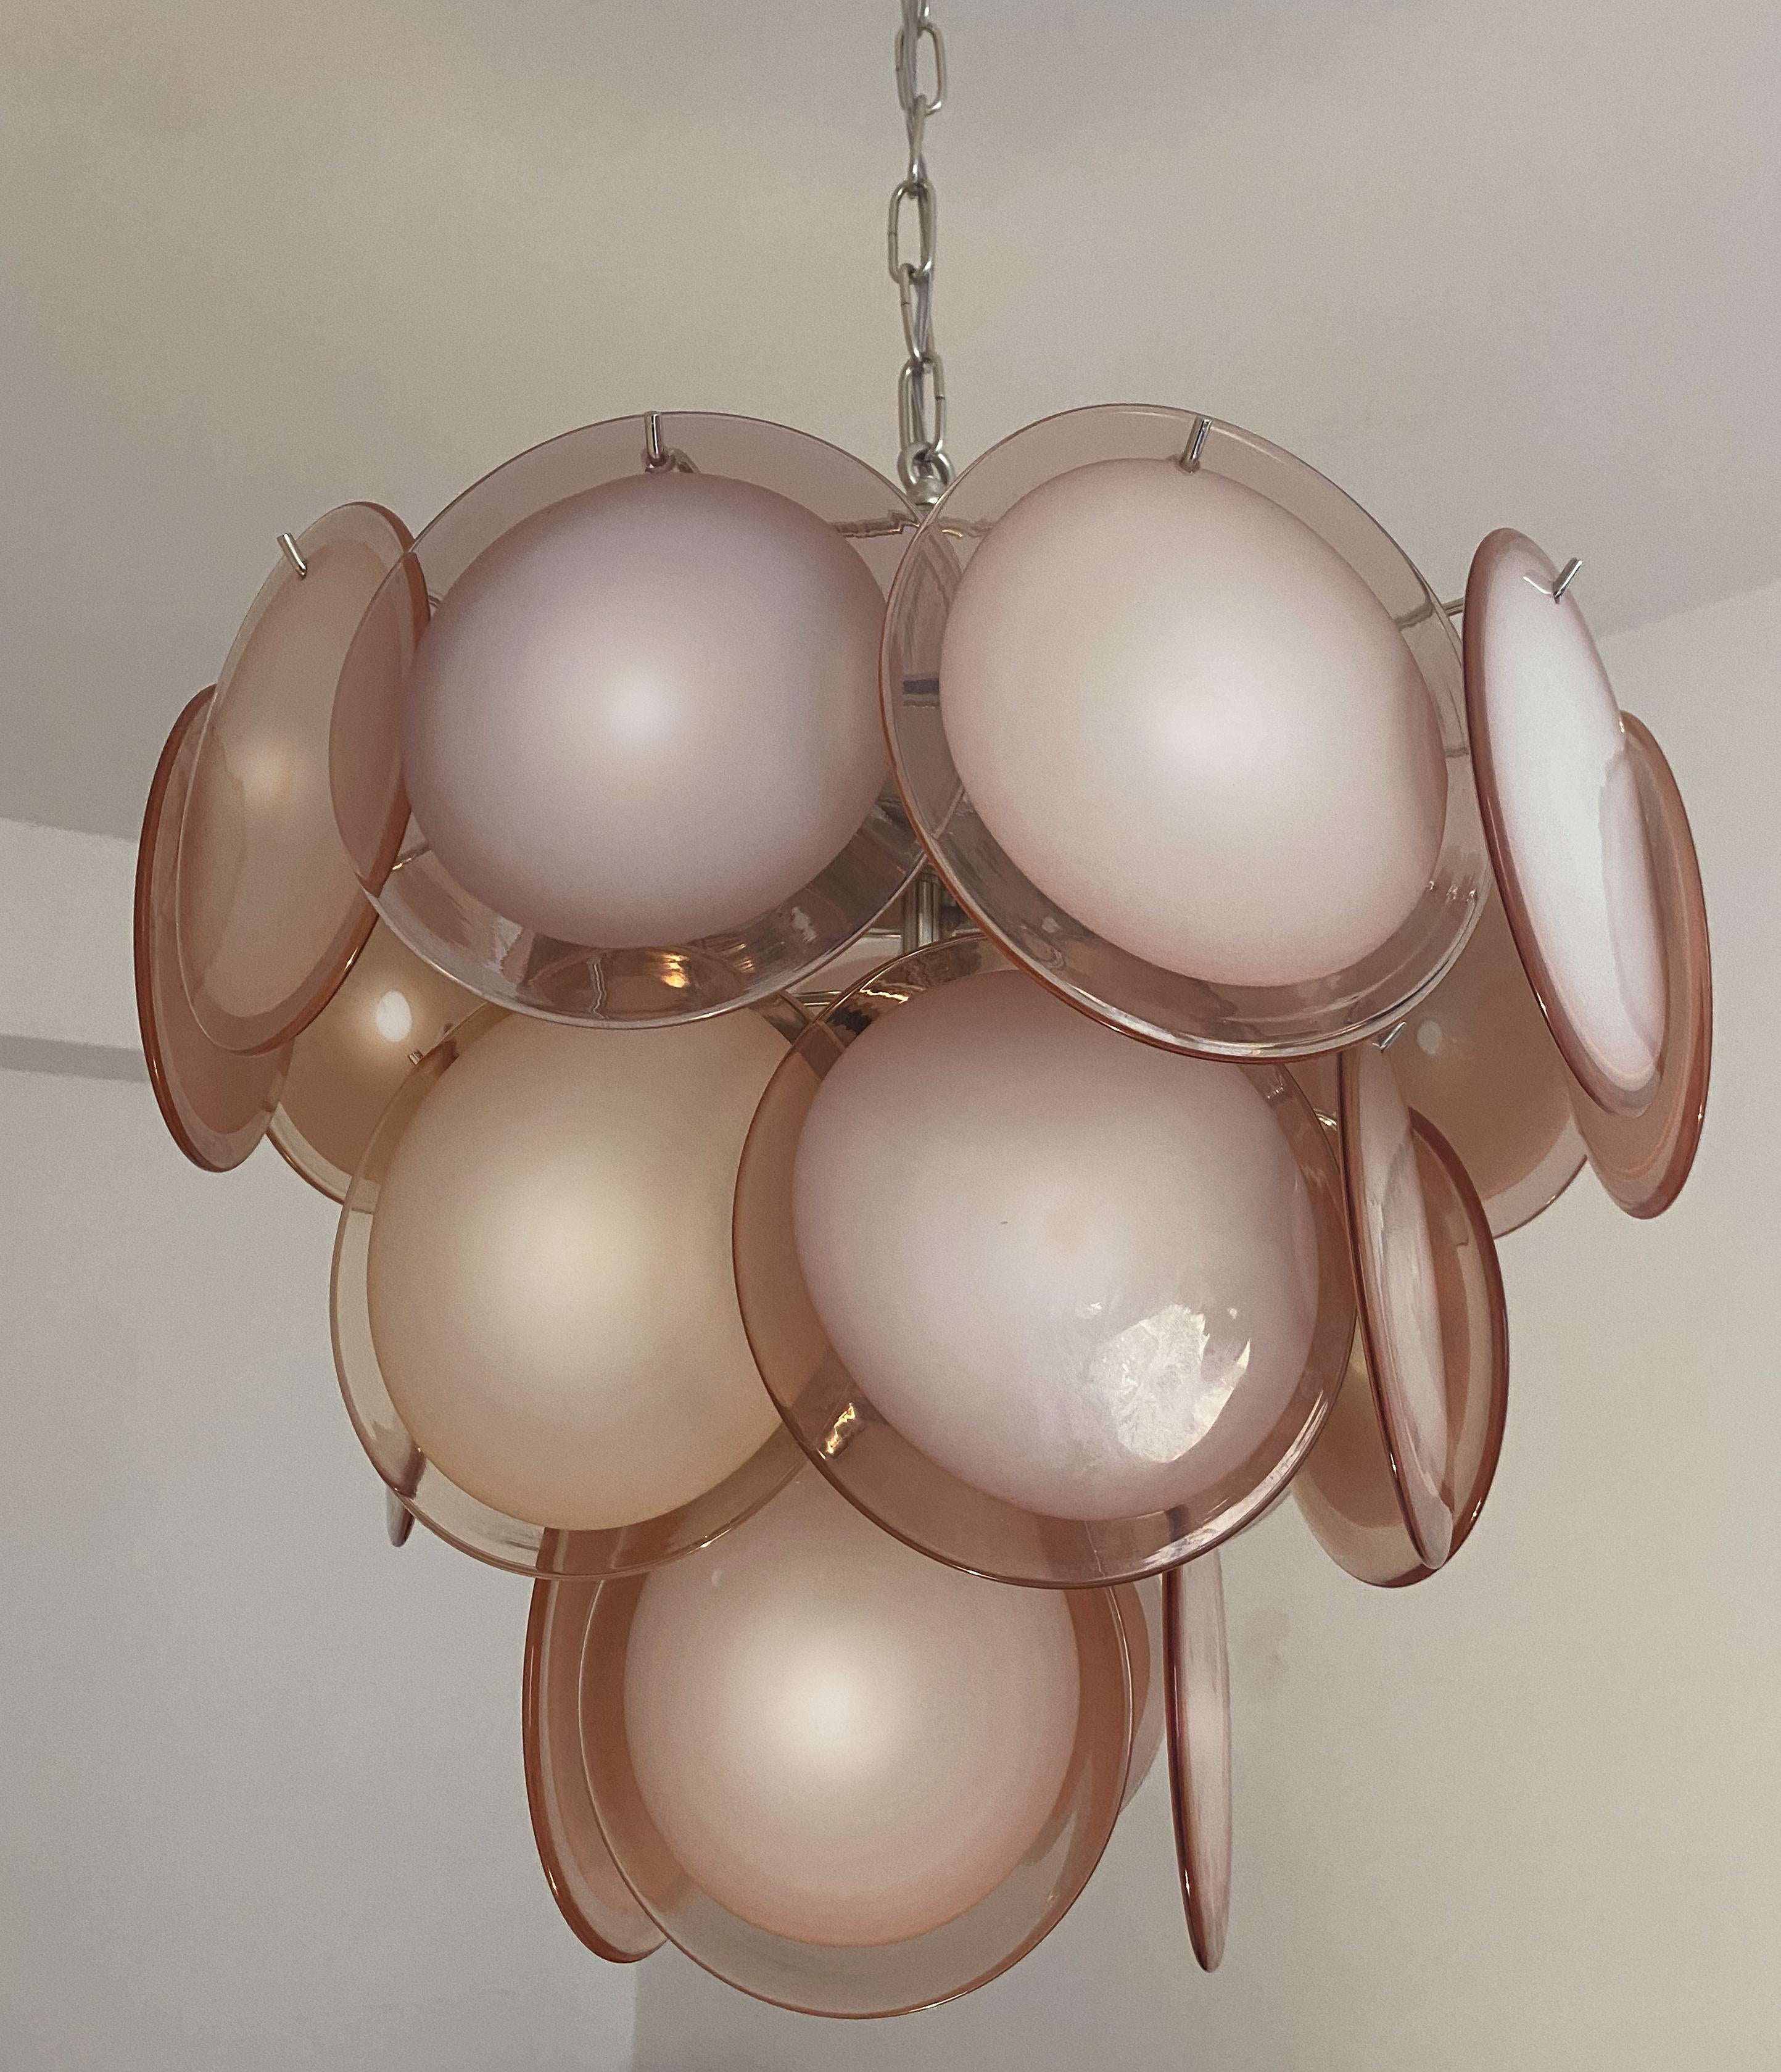 Spectacular pair of chandeliers by Vistosi made in Murano. Each chandelier is formed by 23 antique pink discs of precious Murano glass are arranged on three levels. Seven-light. Measures: Height without chain 00 cm. Available also with white